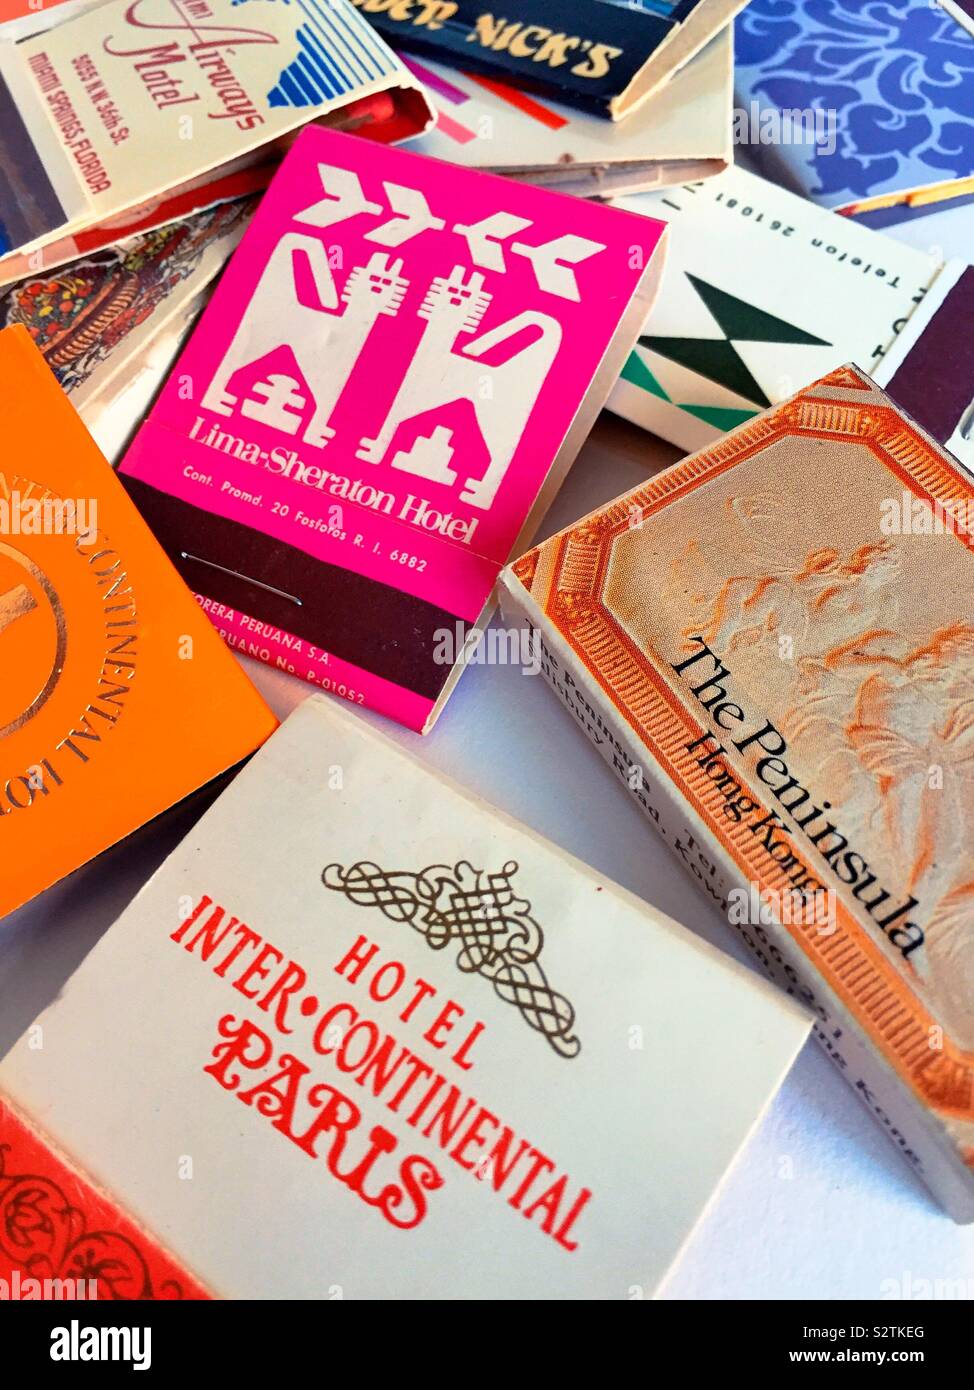 Vintage matchbooks and match boxes from around the world Stock Photo